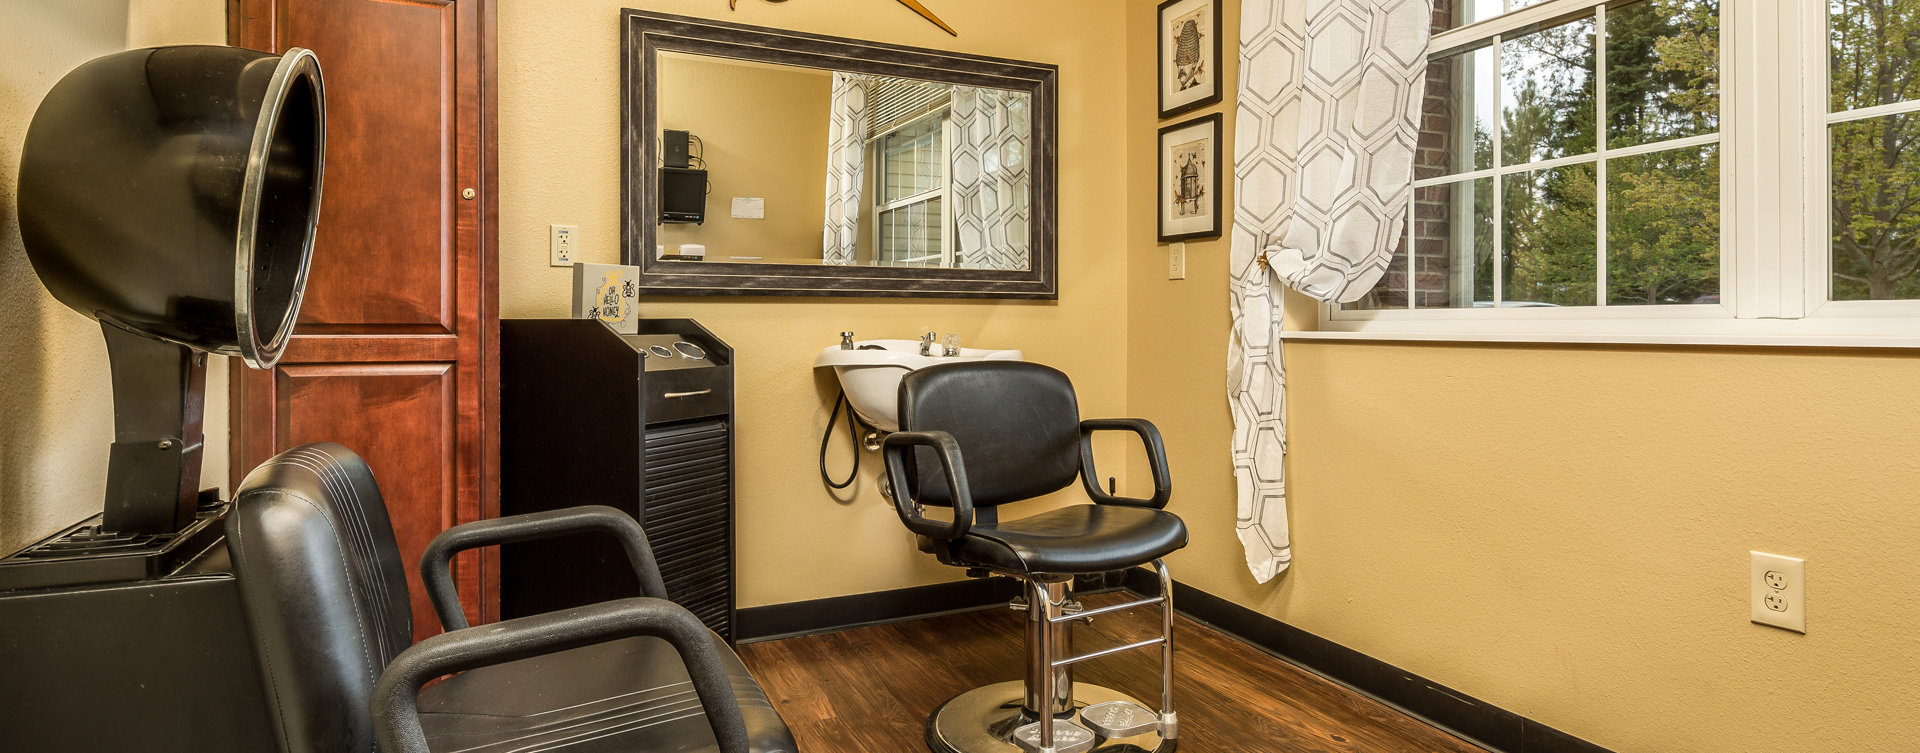 Receive personalized, at-home treatment from our stylist in the salon at Bickford of Okemos